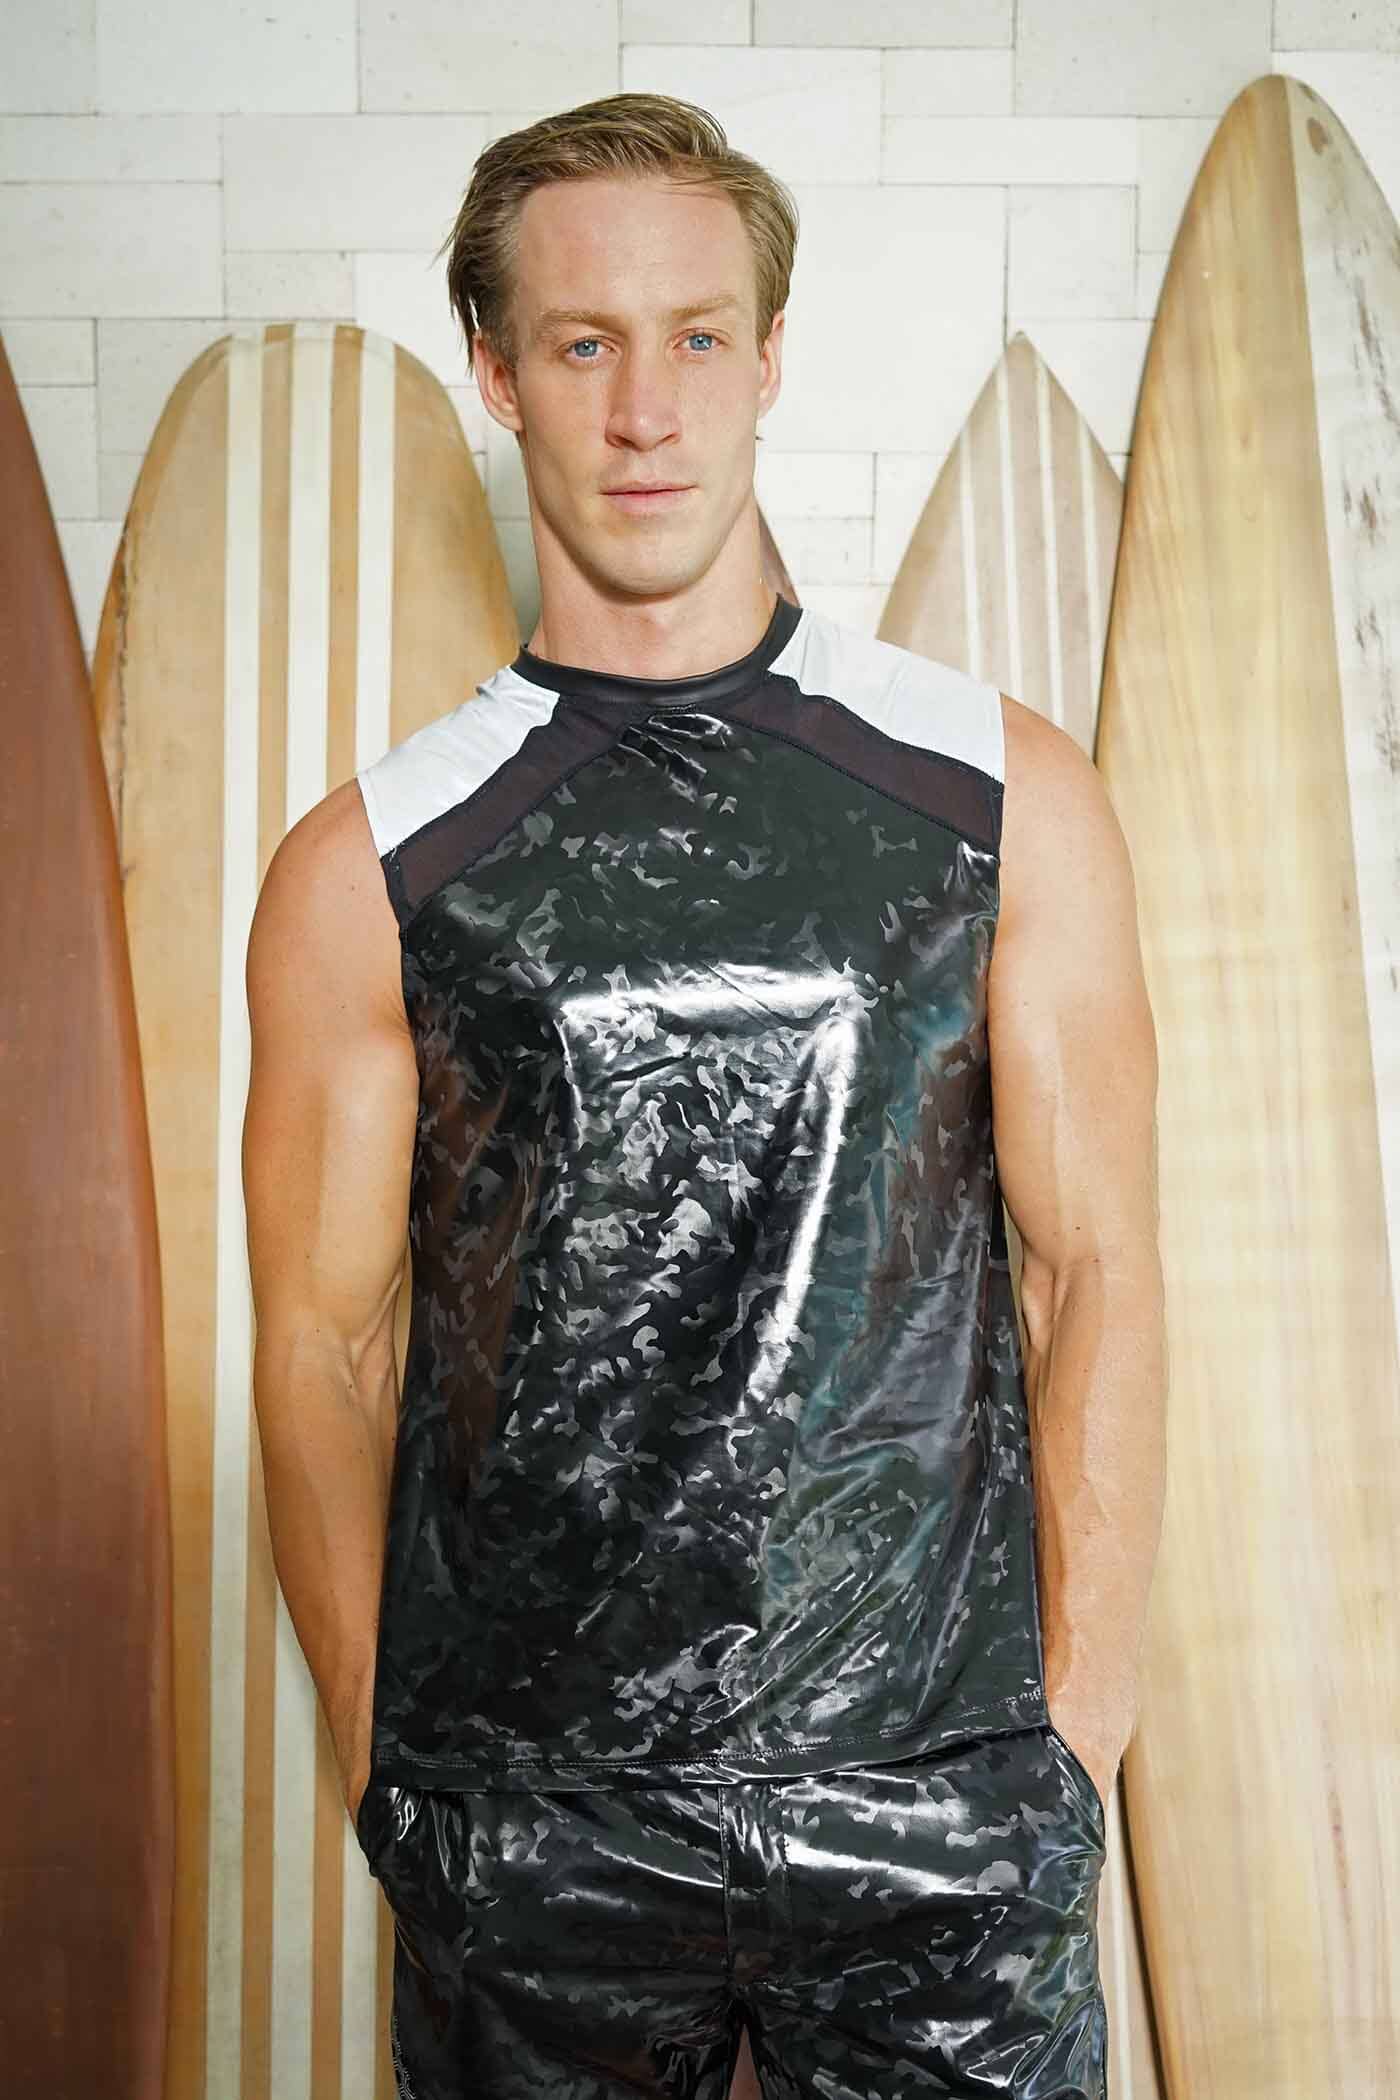 Holographic Black Camo print Muscle tee for men from Love khaos festival clothing brand